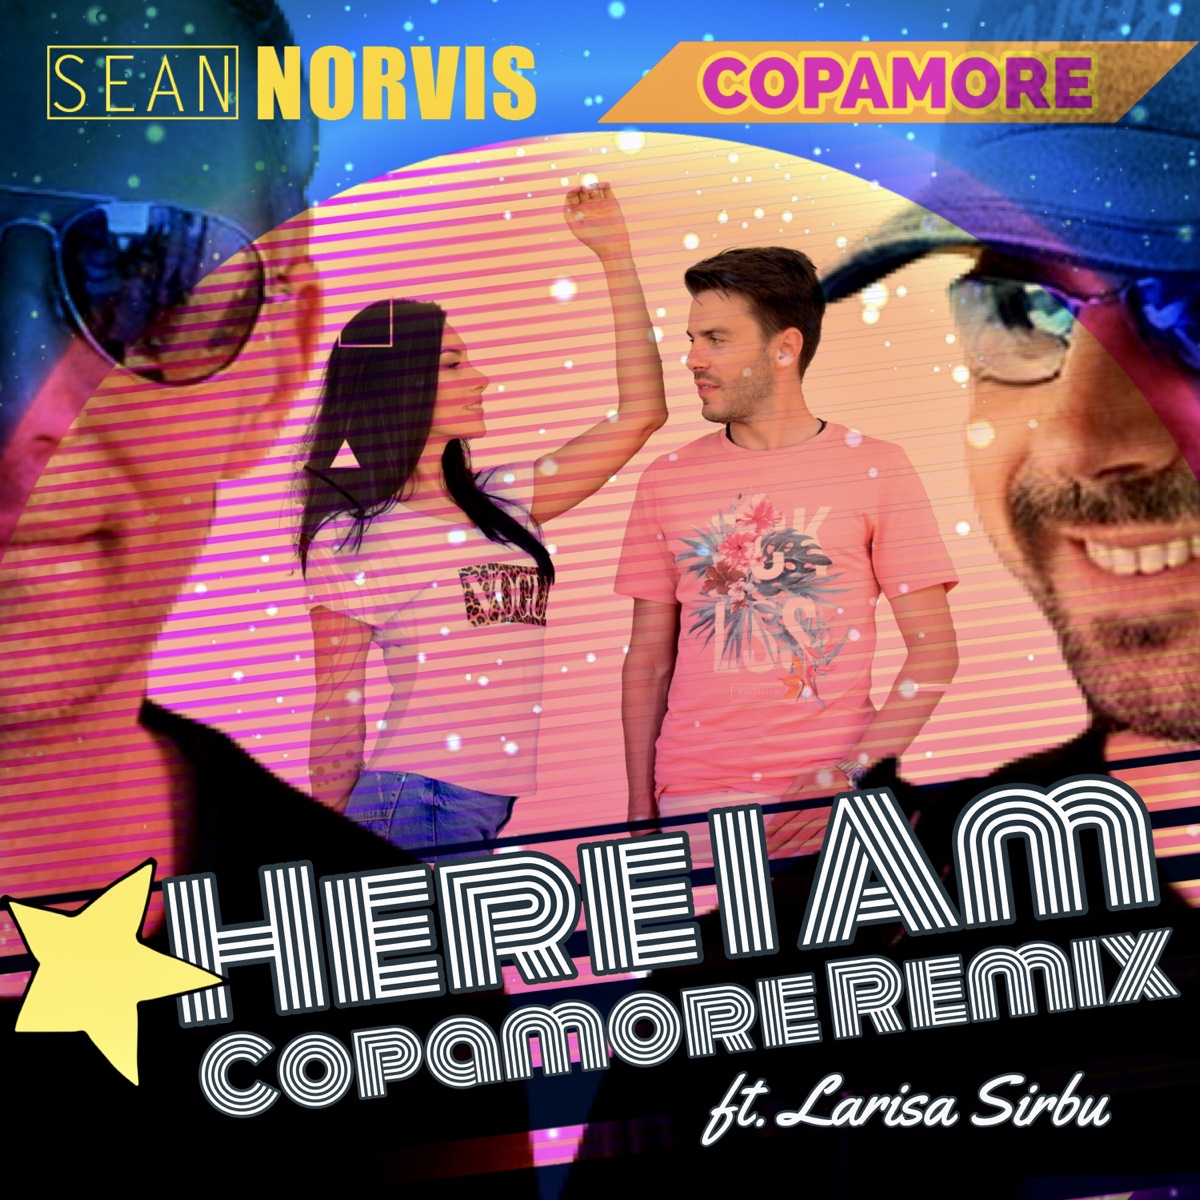 Chico Divertido (Radio Mix) by Copamore on  Music 